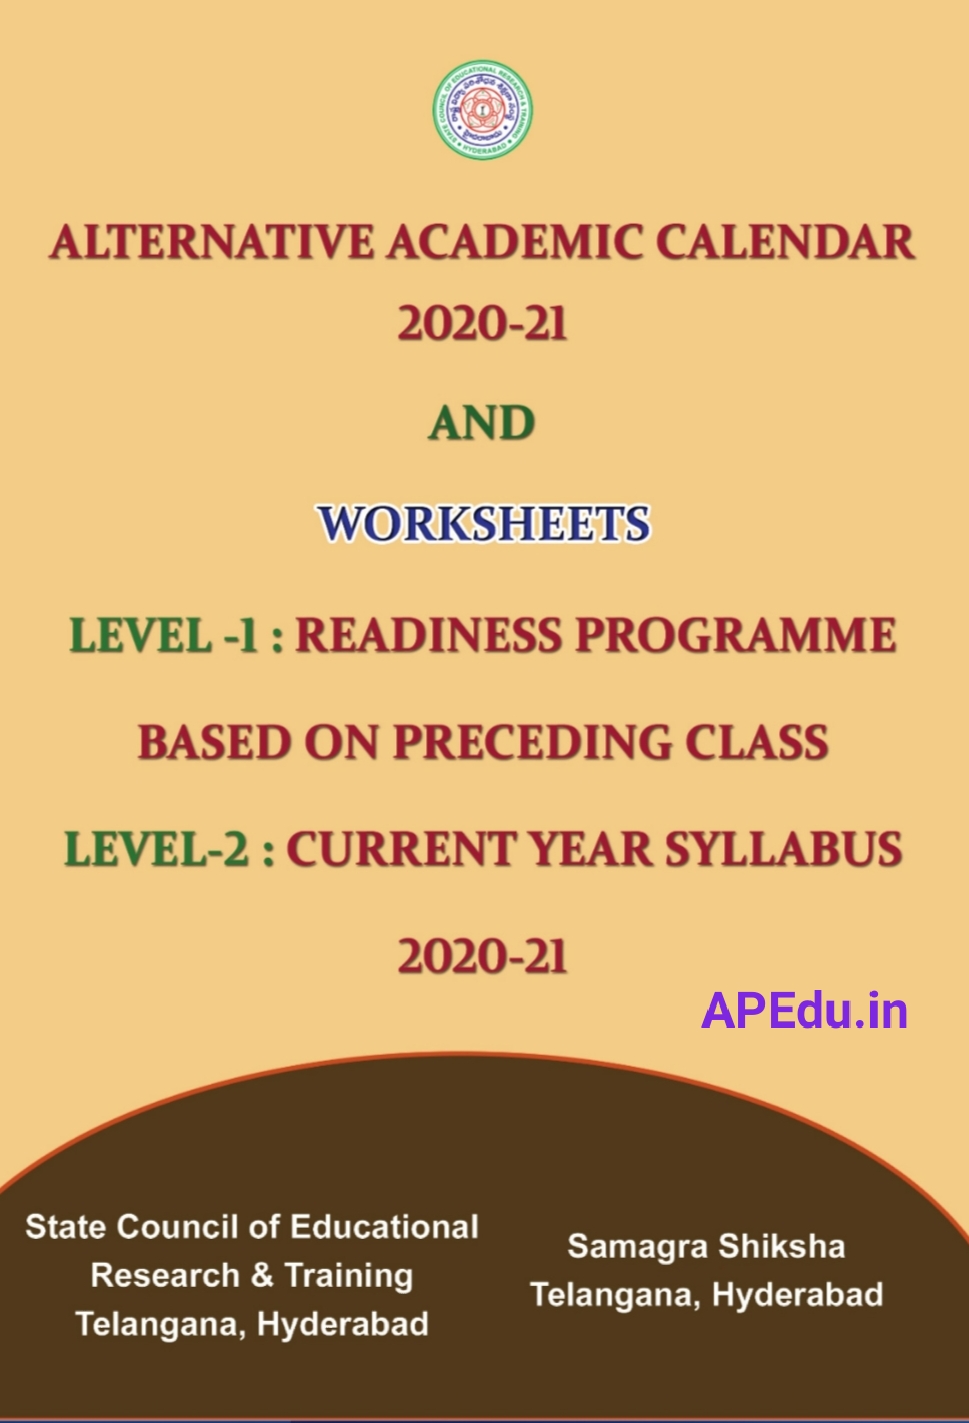 telangana scert work sheets for 2nd to 10th classes all subjects telugu english and urdu mediums download for 2020 21 apedu